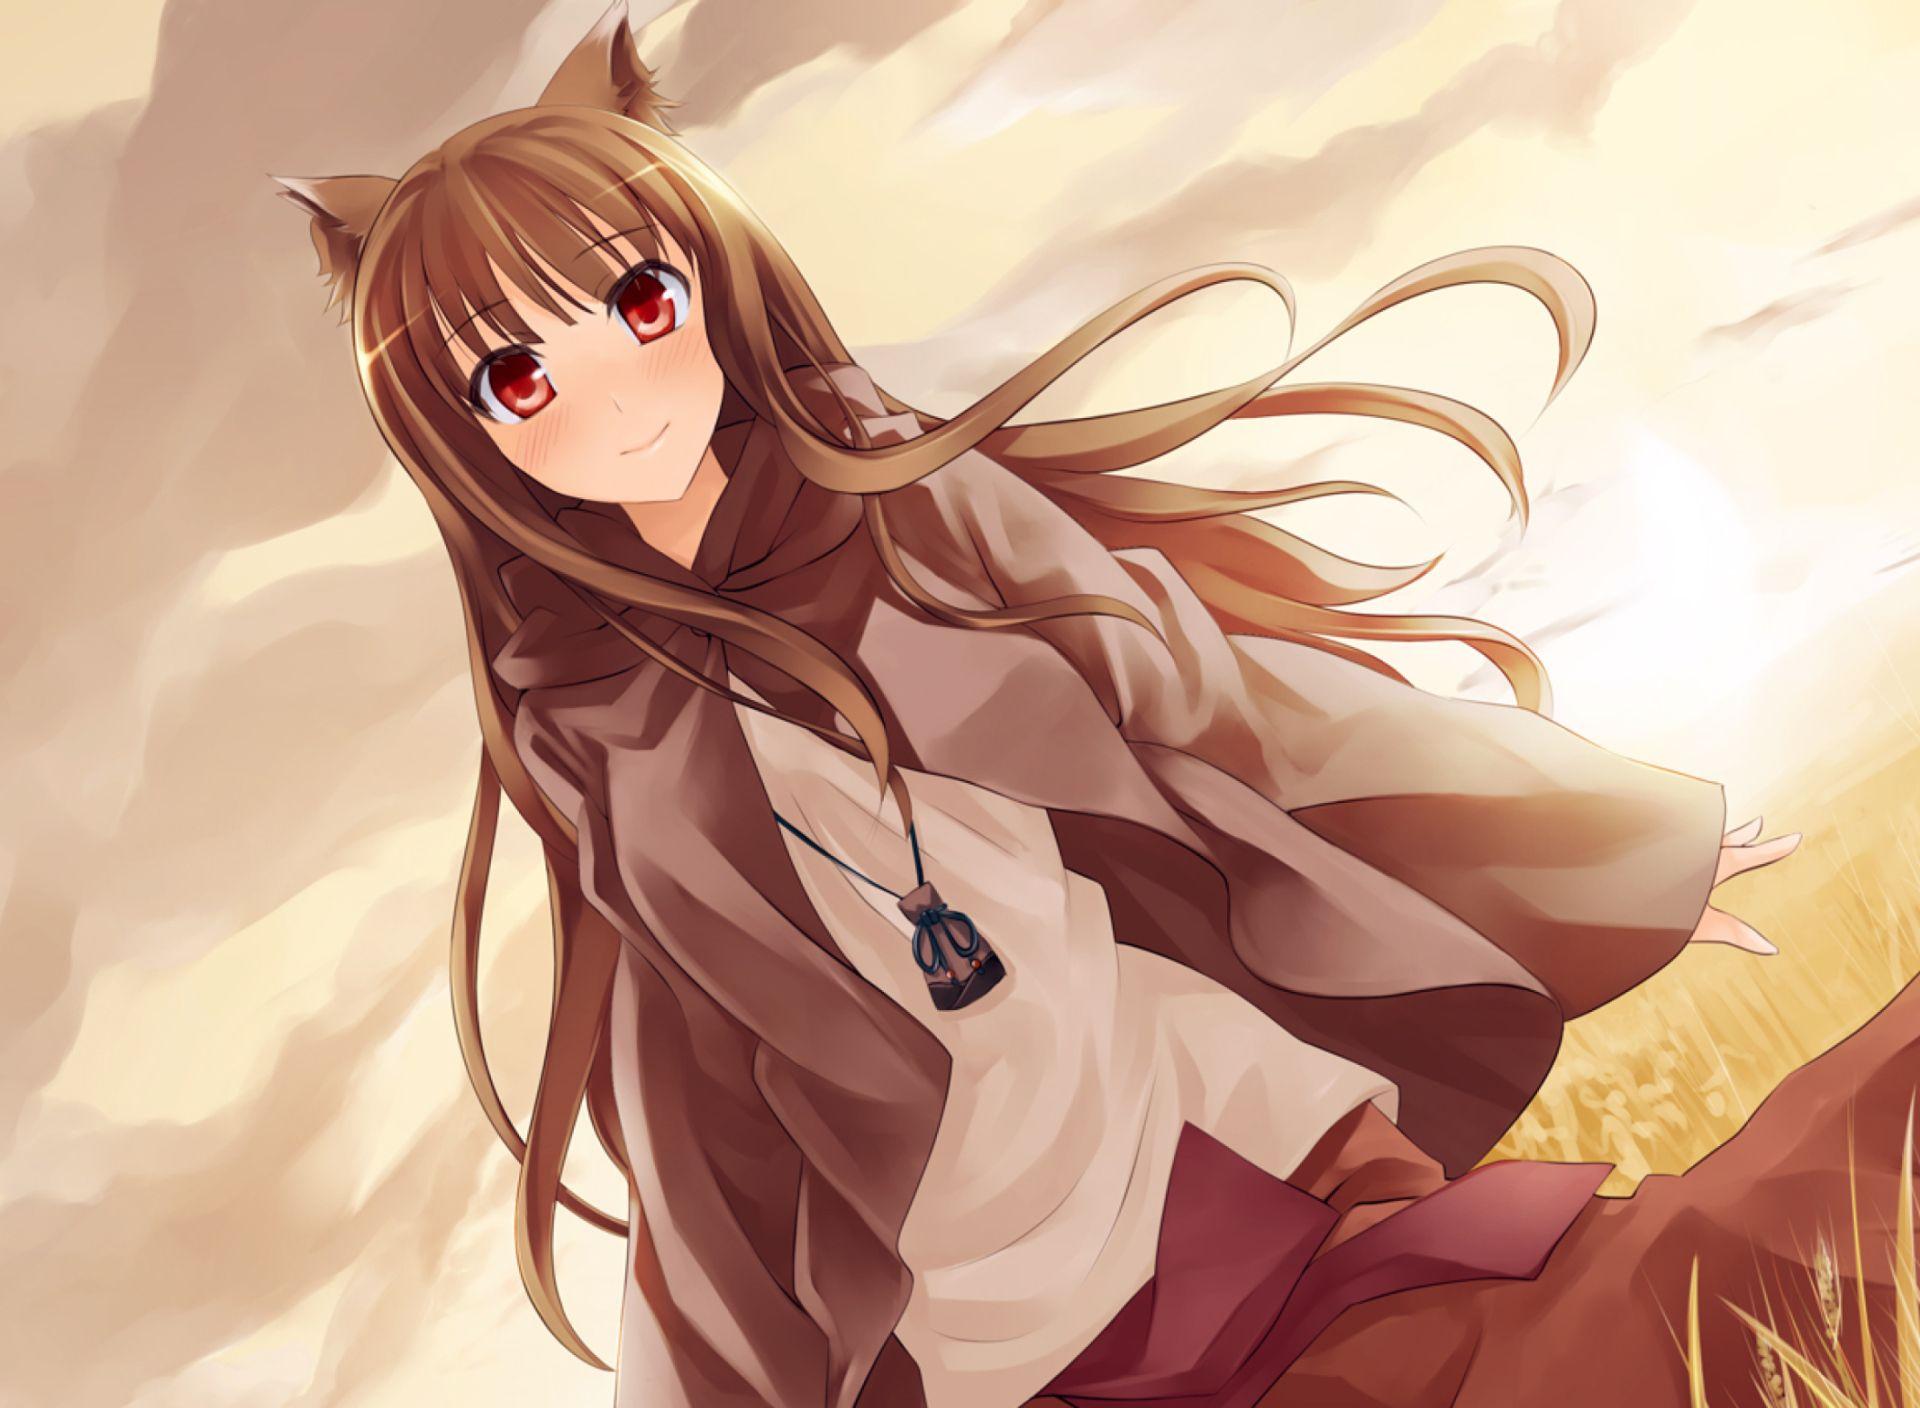 Spice And Wolf Wallpaper, 29 Widescreen 100% Quality HD